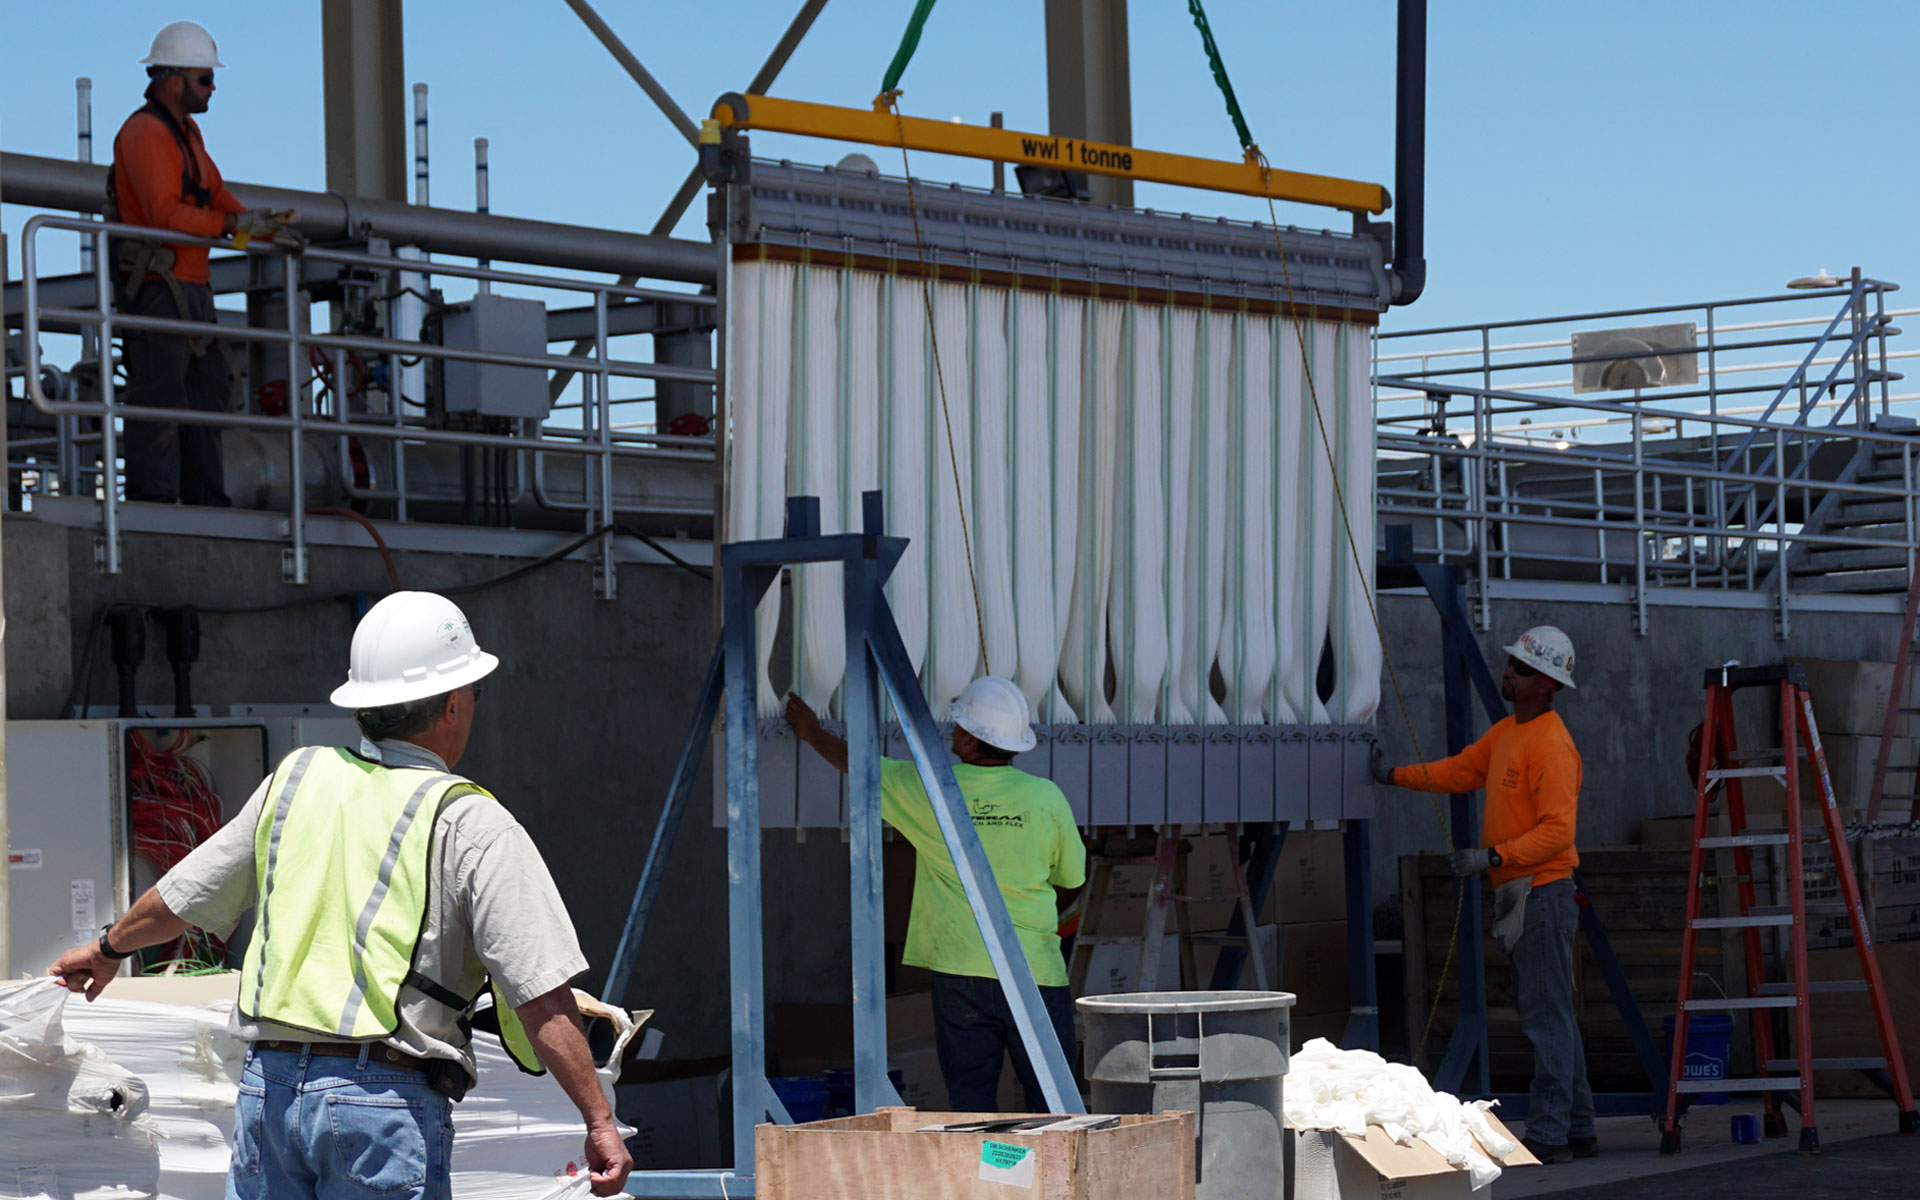 New filtering equipment is installed at the Modesto wastewater treament plant, part of a $150 million upgrade.